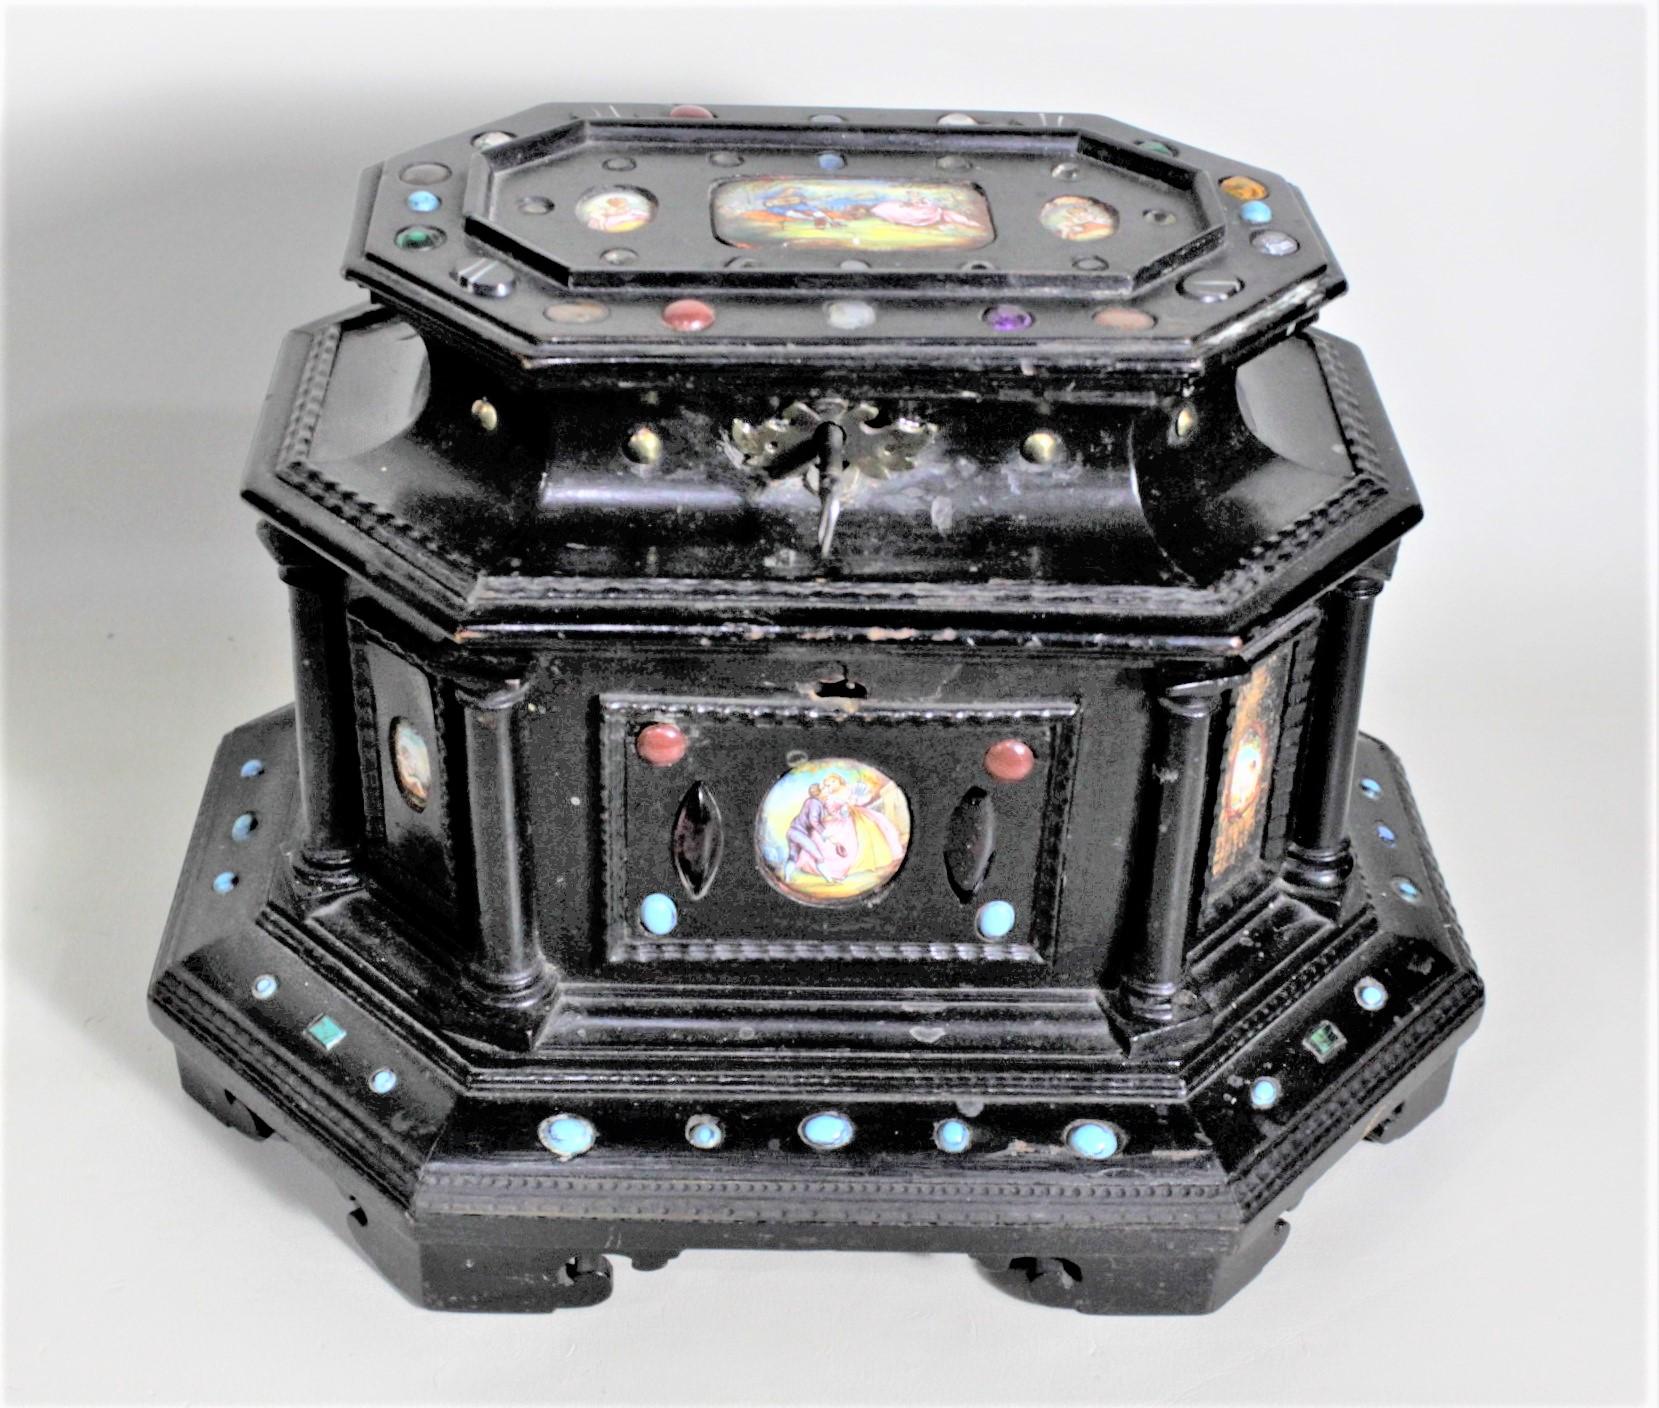 This antique and elaborate wooden jewelry casket or box is unsigned, but presumed to have been made in Austria in approximately 1880 in a Gothic Revival style. The box has two tiers and an octagonal shape with beaded moldings and pillars. The two